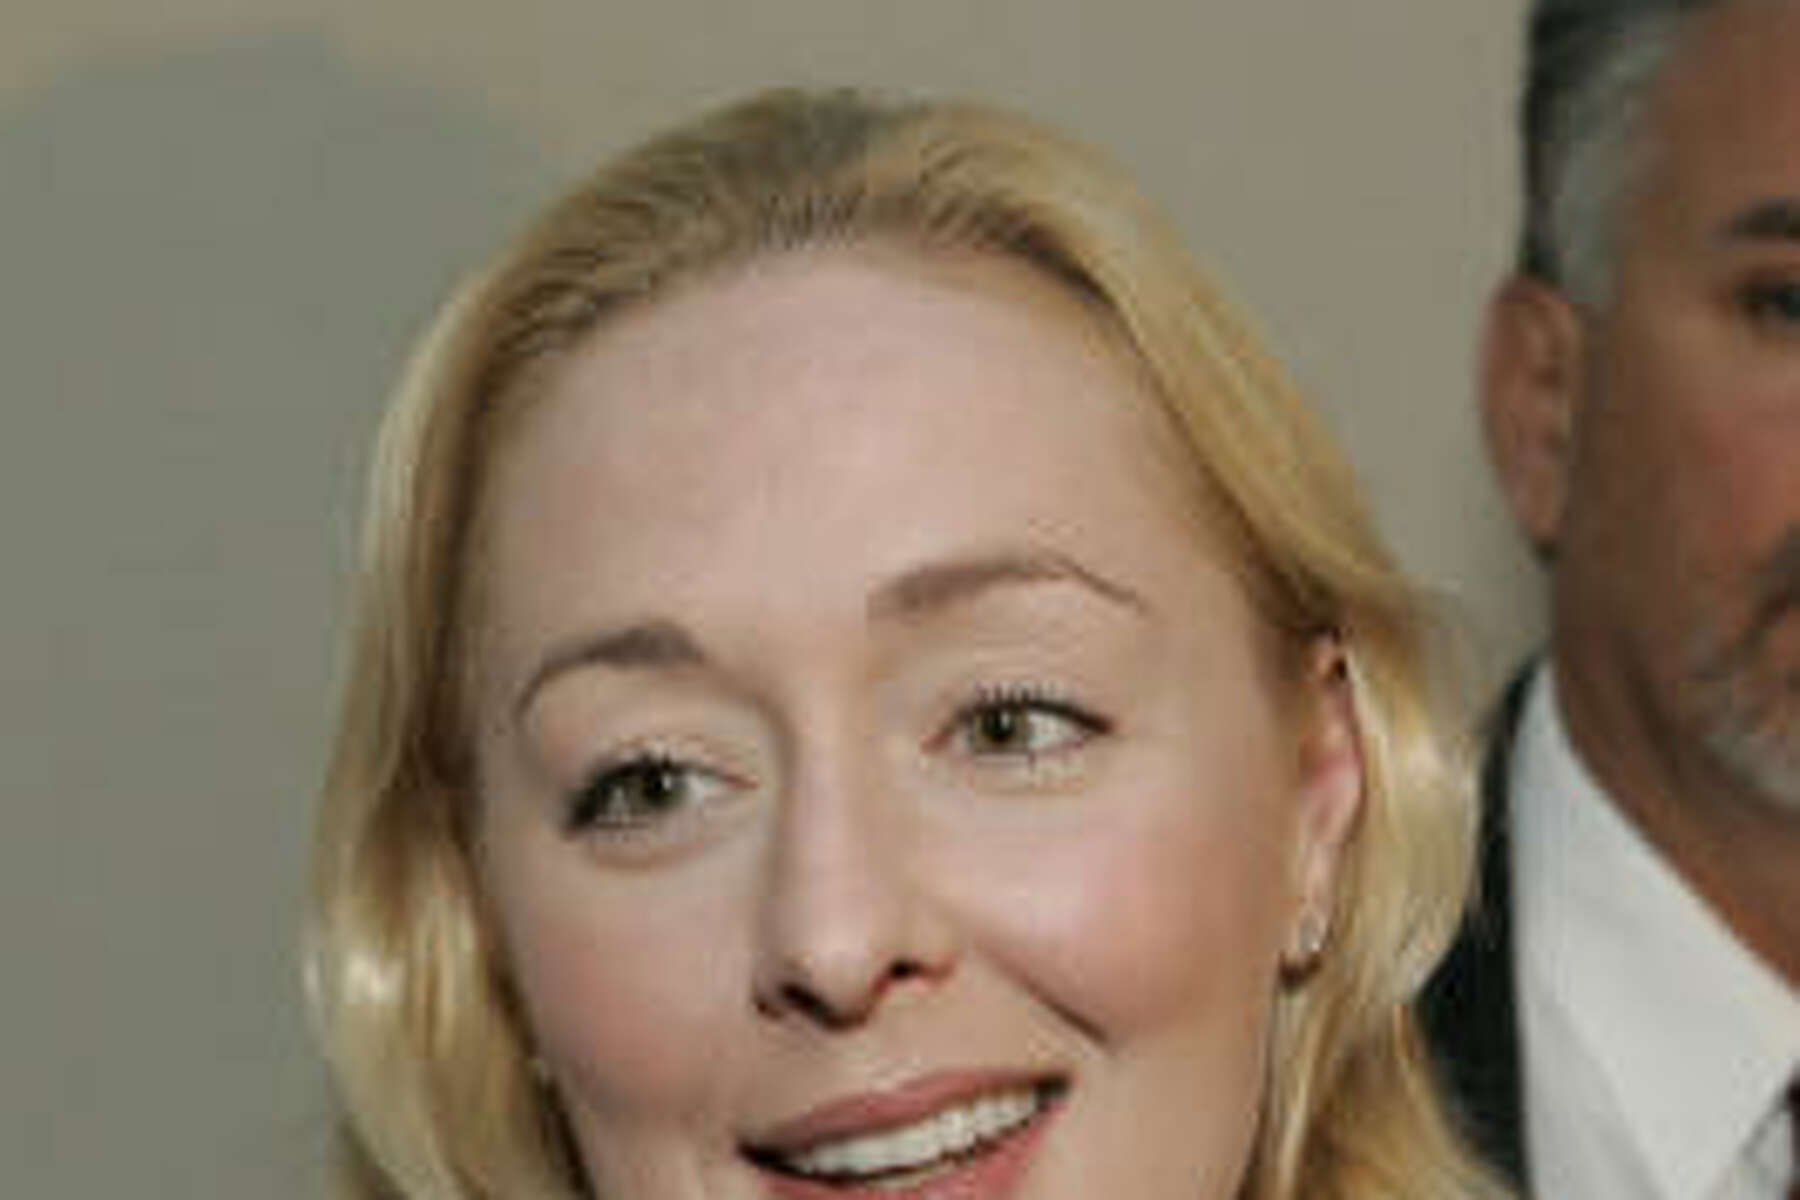 Mindy McCready Admits to Relationship with Roger Clemens